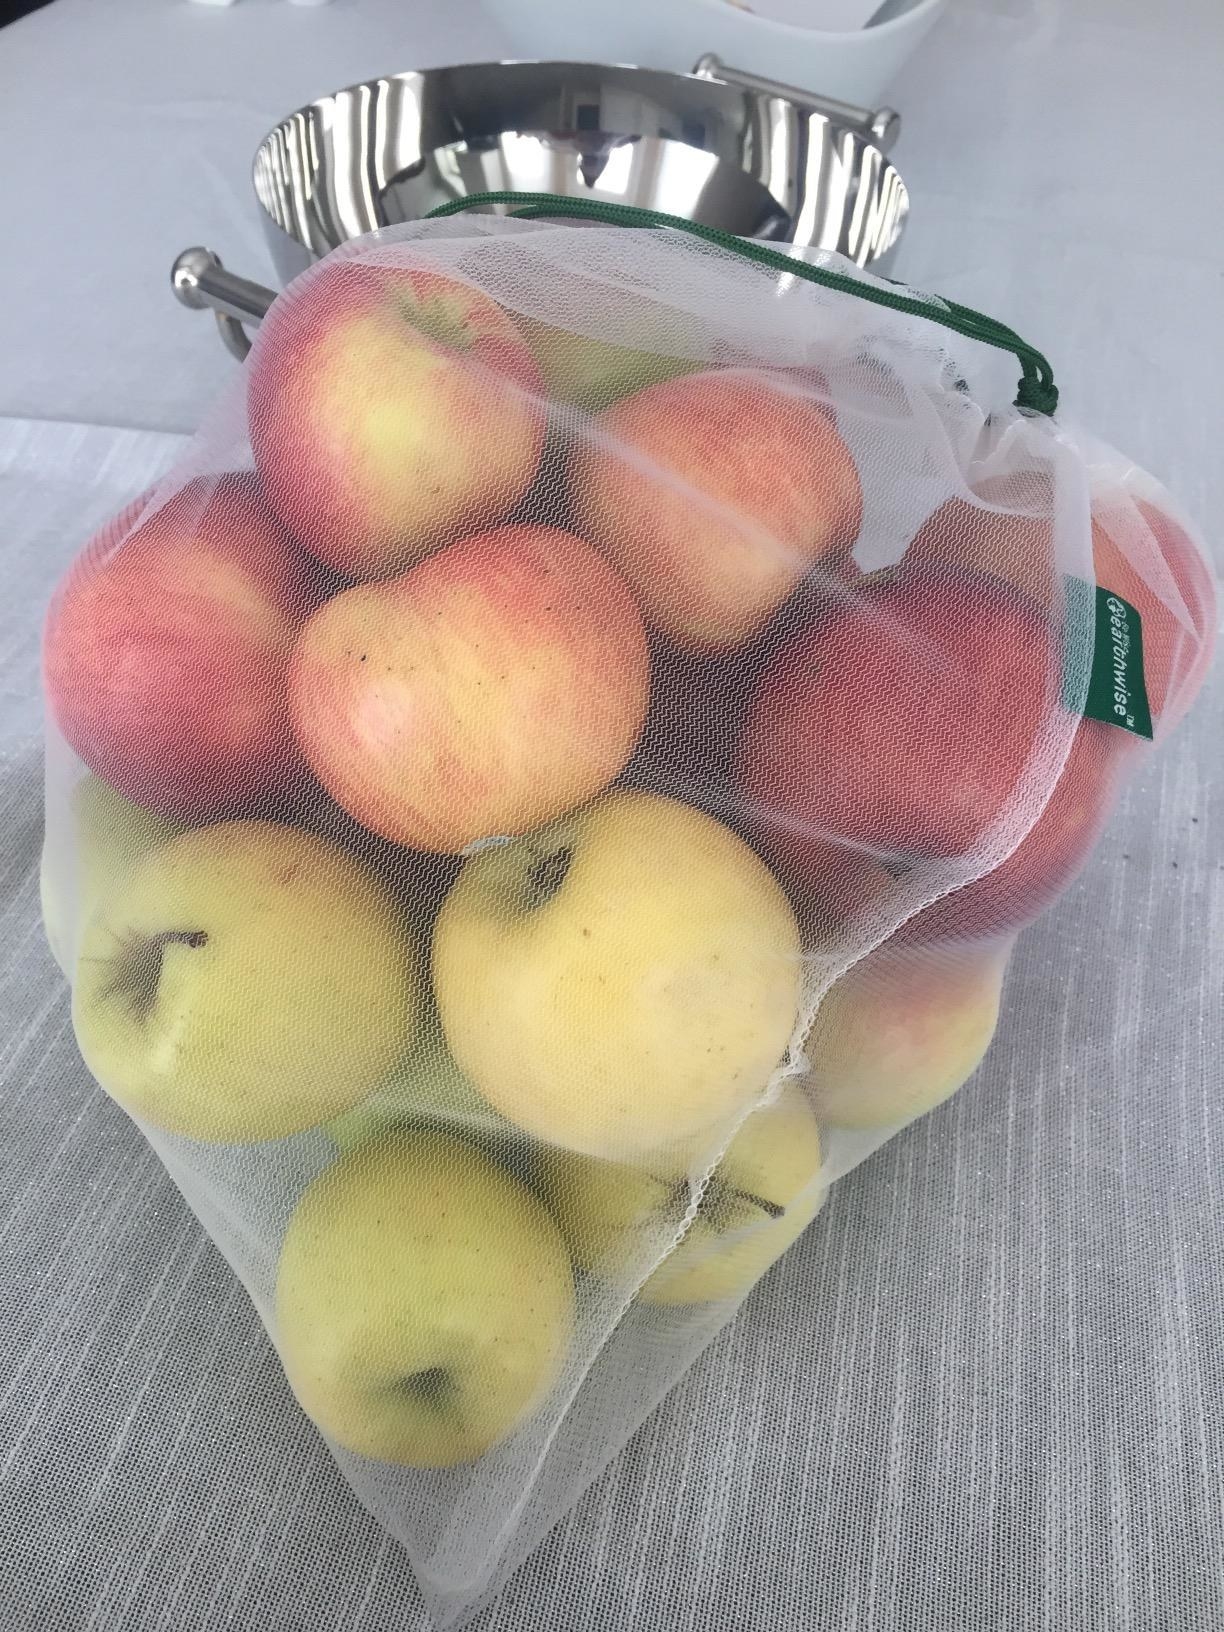 Reviewer photo of a bag holding a dozen or so apples